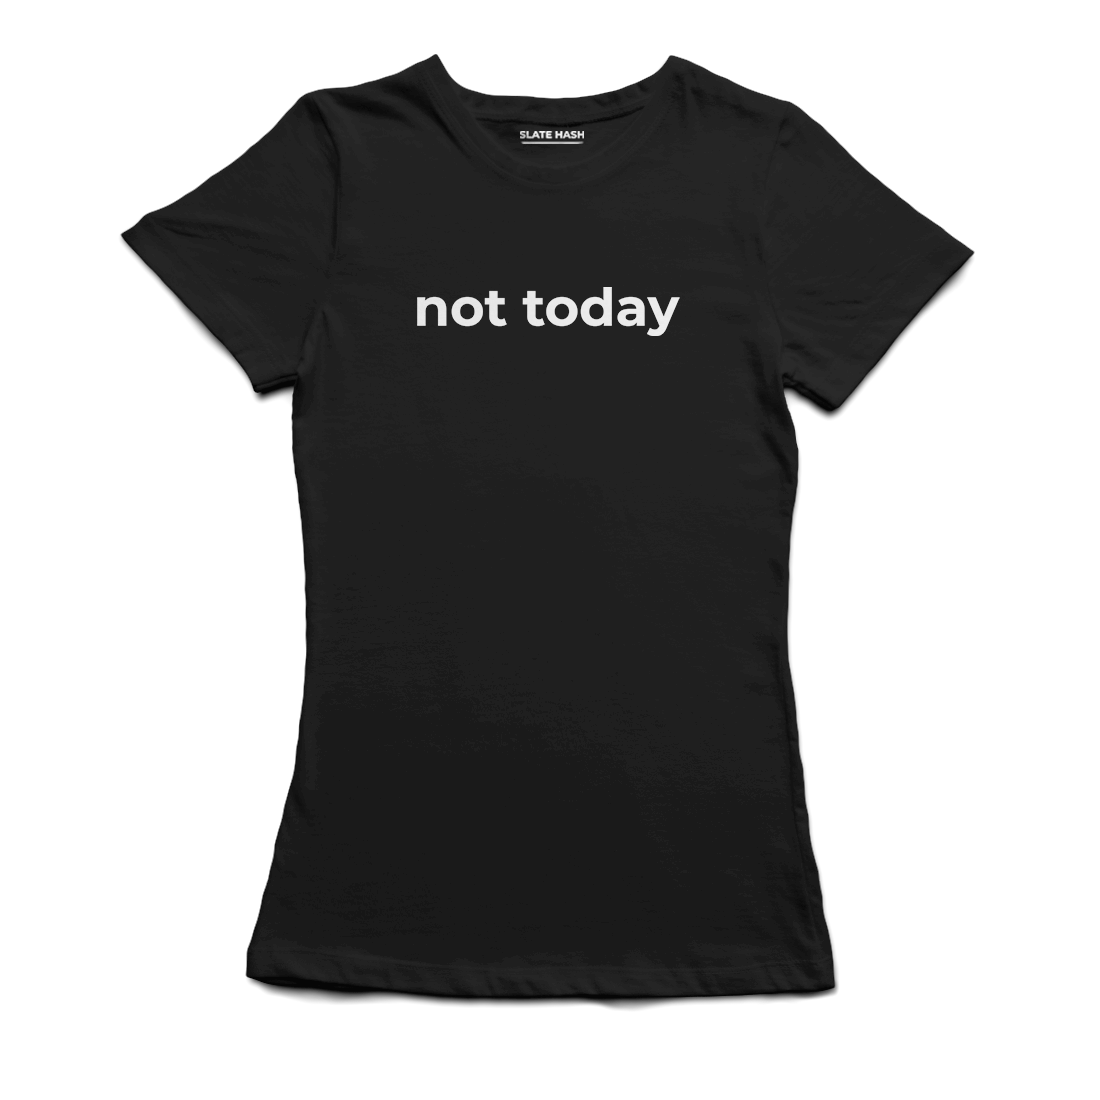 Not today T-Shirt